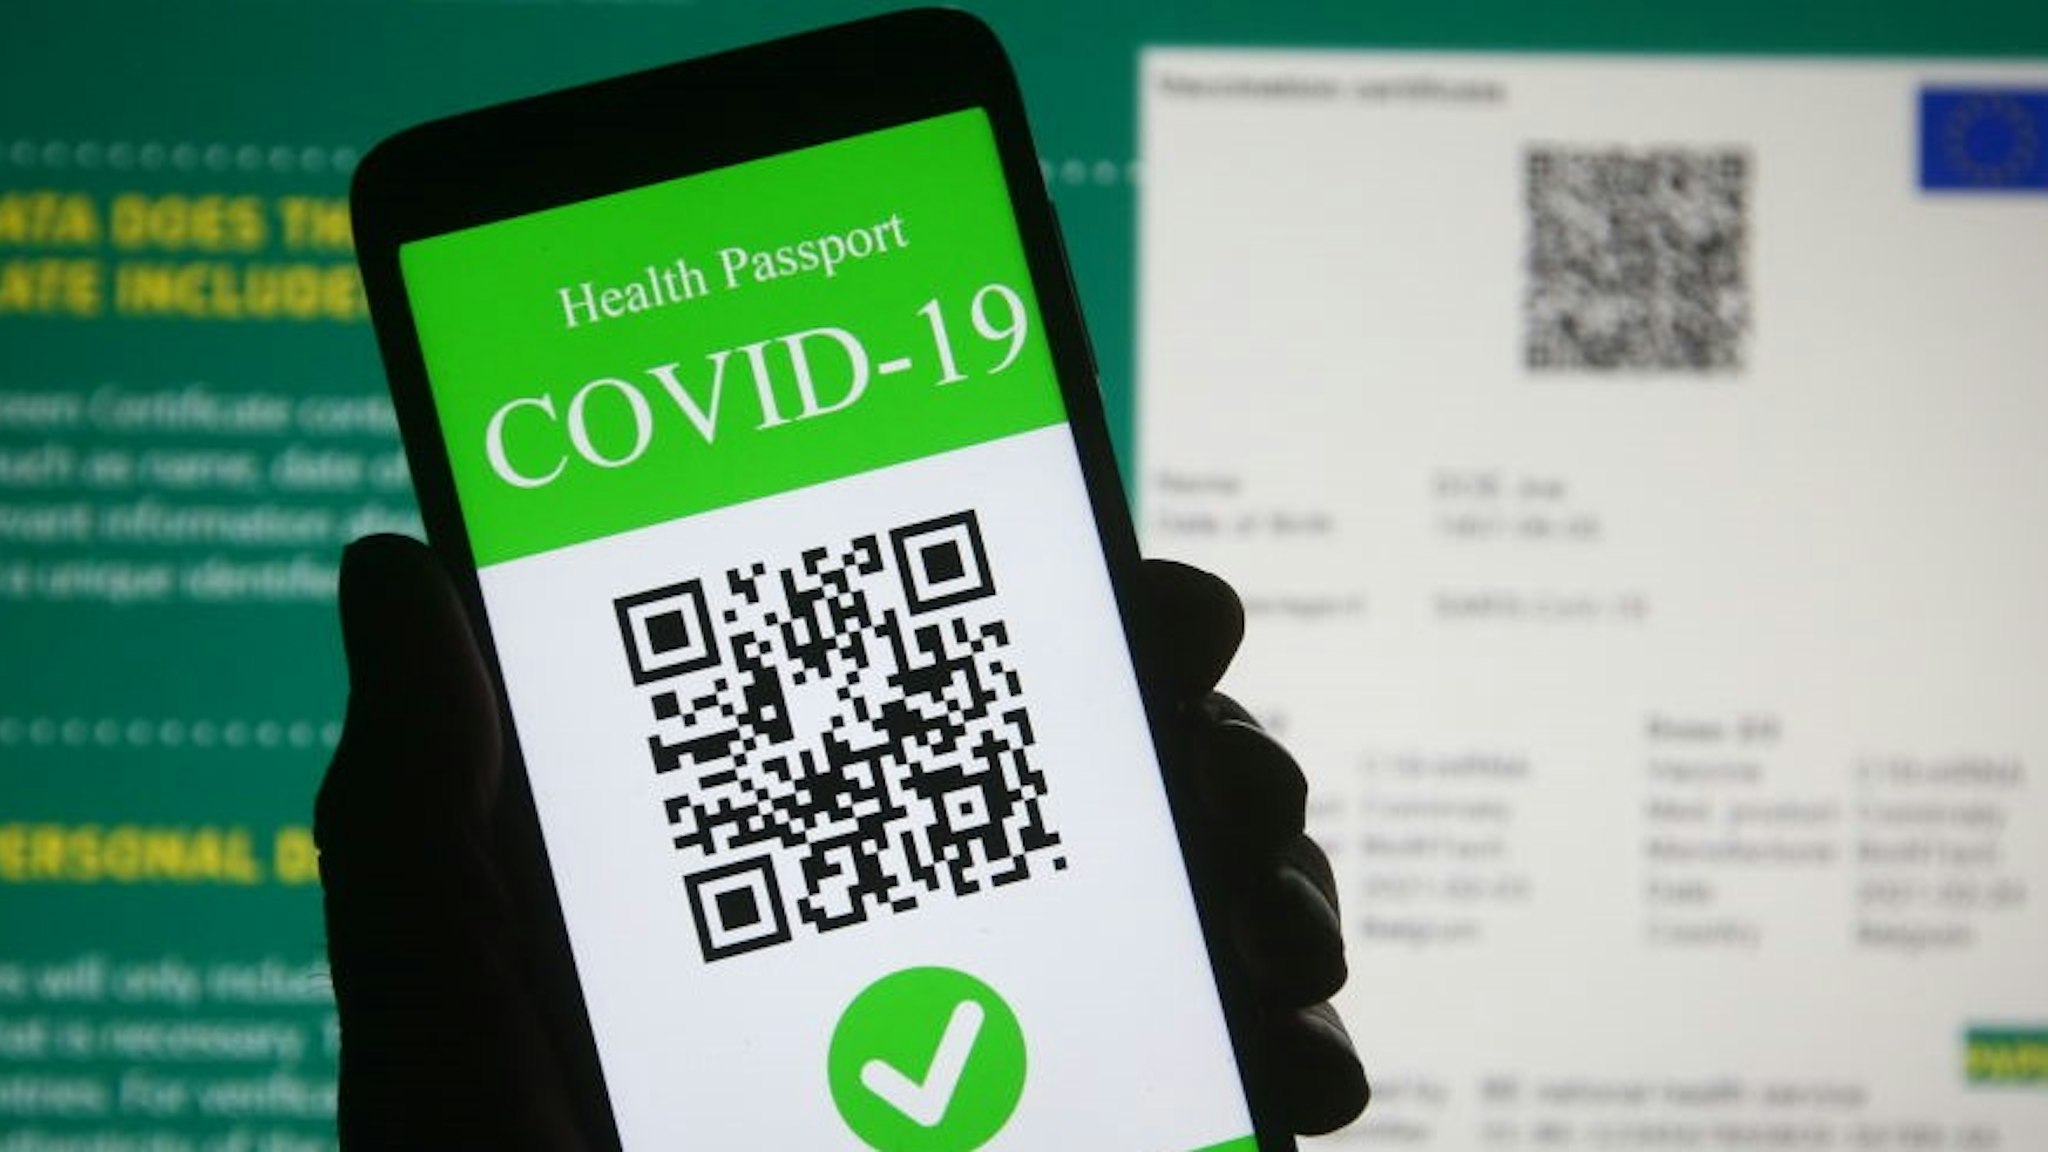 UKRAINE - 2021/03/28: In this photo illustration, a symbolic COVID-19 health passport seen displayed on a smartphone screen in front of the European Commission information about a proposal to create a Digital Green Certificate. On March 17 the European Commission presented a proposal to create a Digital Green Certificate to facilitate the safe free movement of the EU citizens during the COVID-19 pandemic. (Photo Illustration by